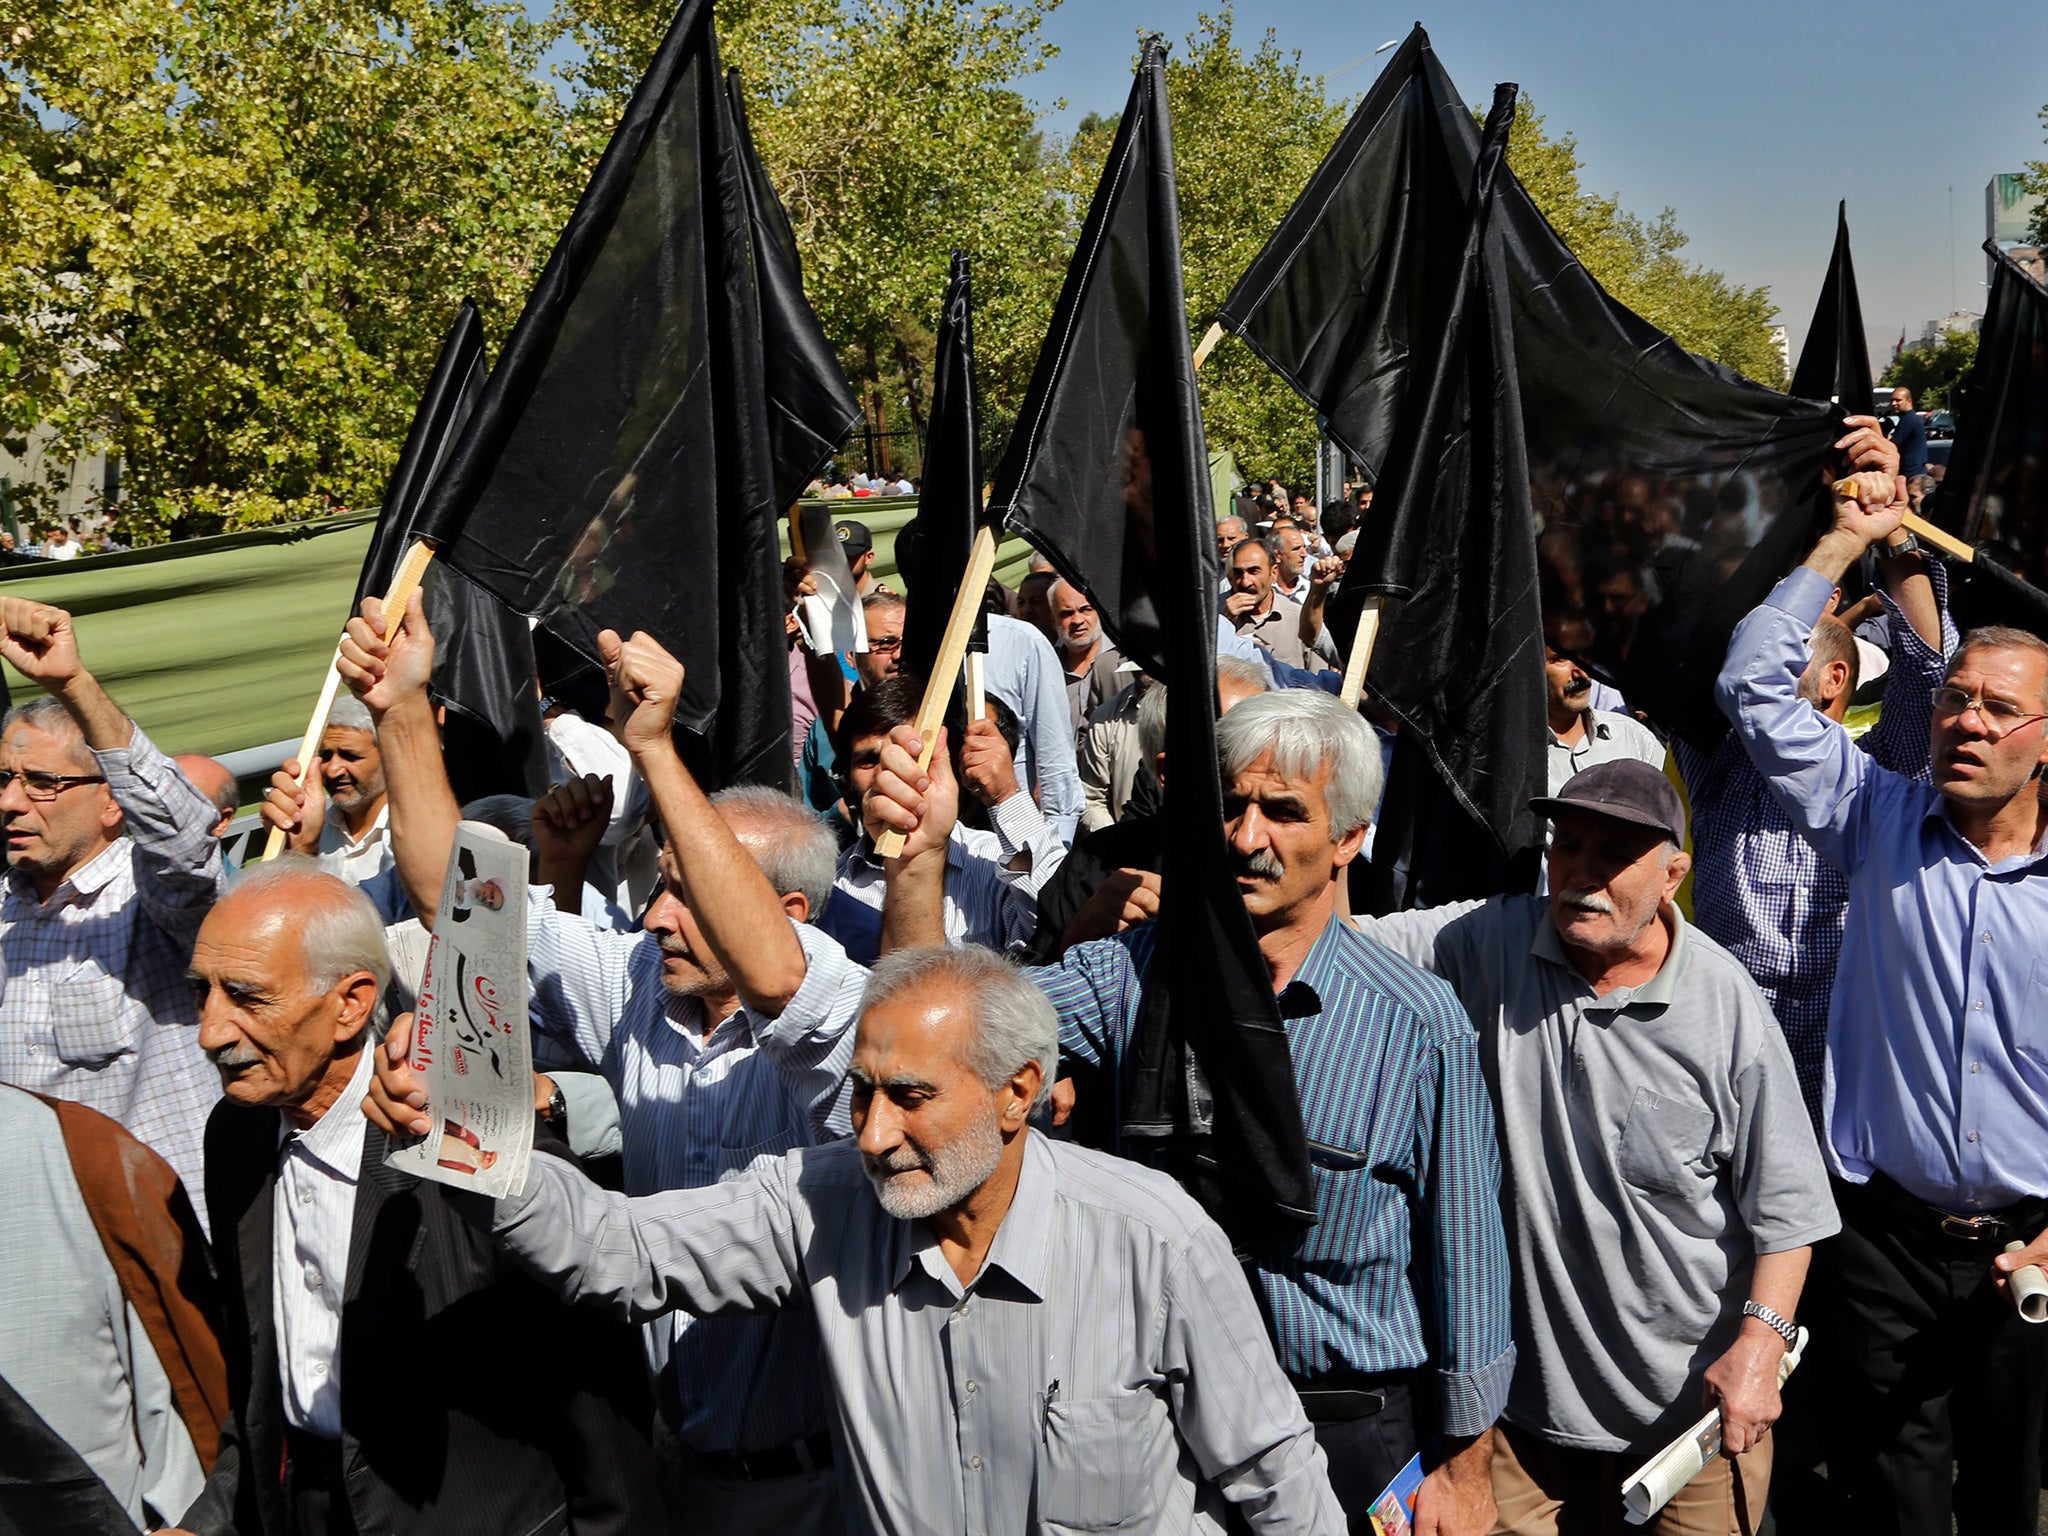 Thousands of protesters took to the streets in Tehran on Friday to condemn the Saudi government over the disaster